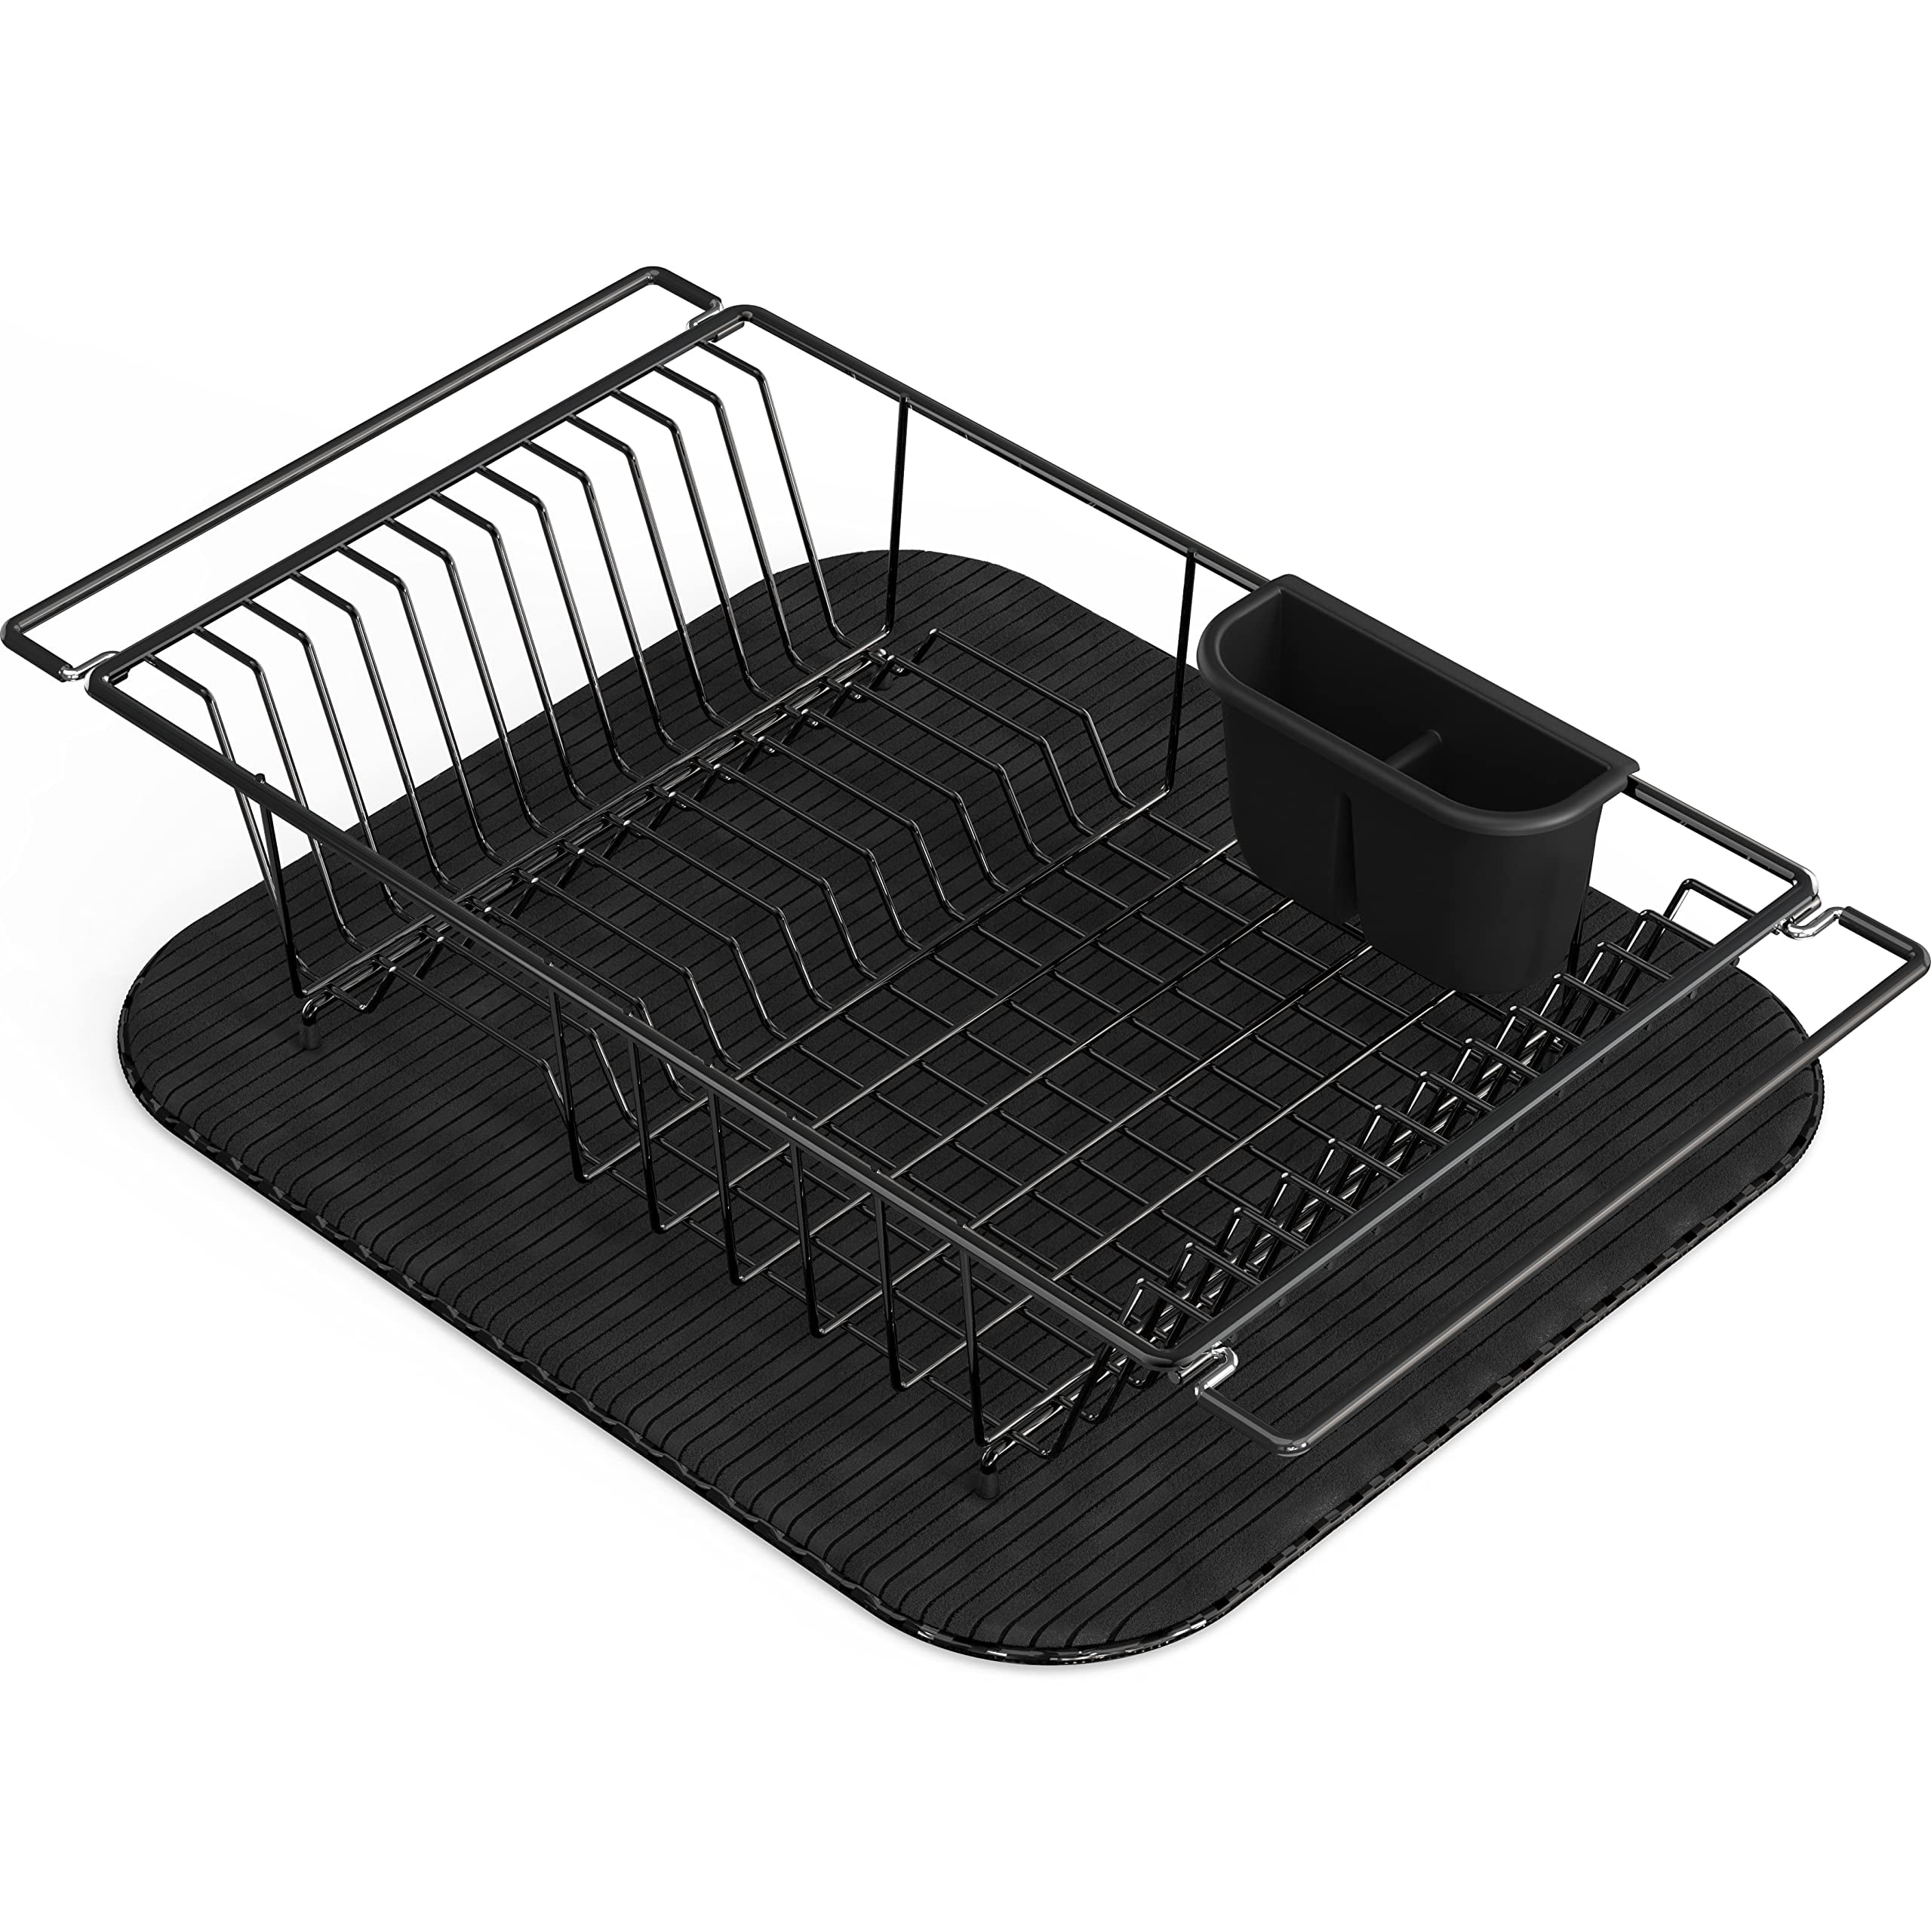 SNTD Over The Sink Dish Drying Rack, Adjustable (26.3 to 34.3 inch) 2 Tier Kitchen Counter Dish Drying Rack with Utensil Holder Metal Utility Hook, Black